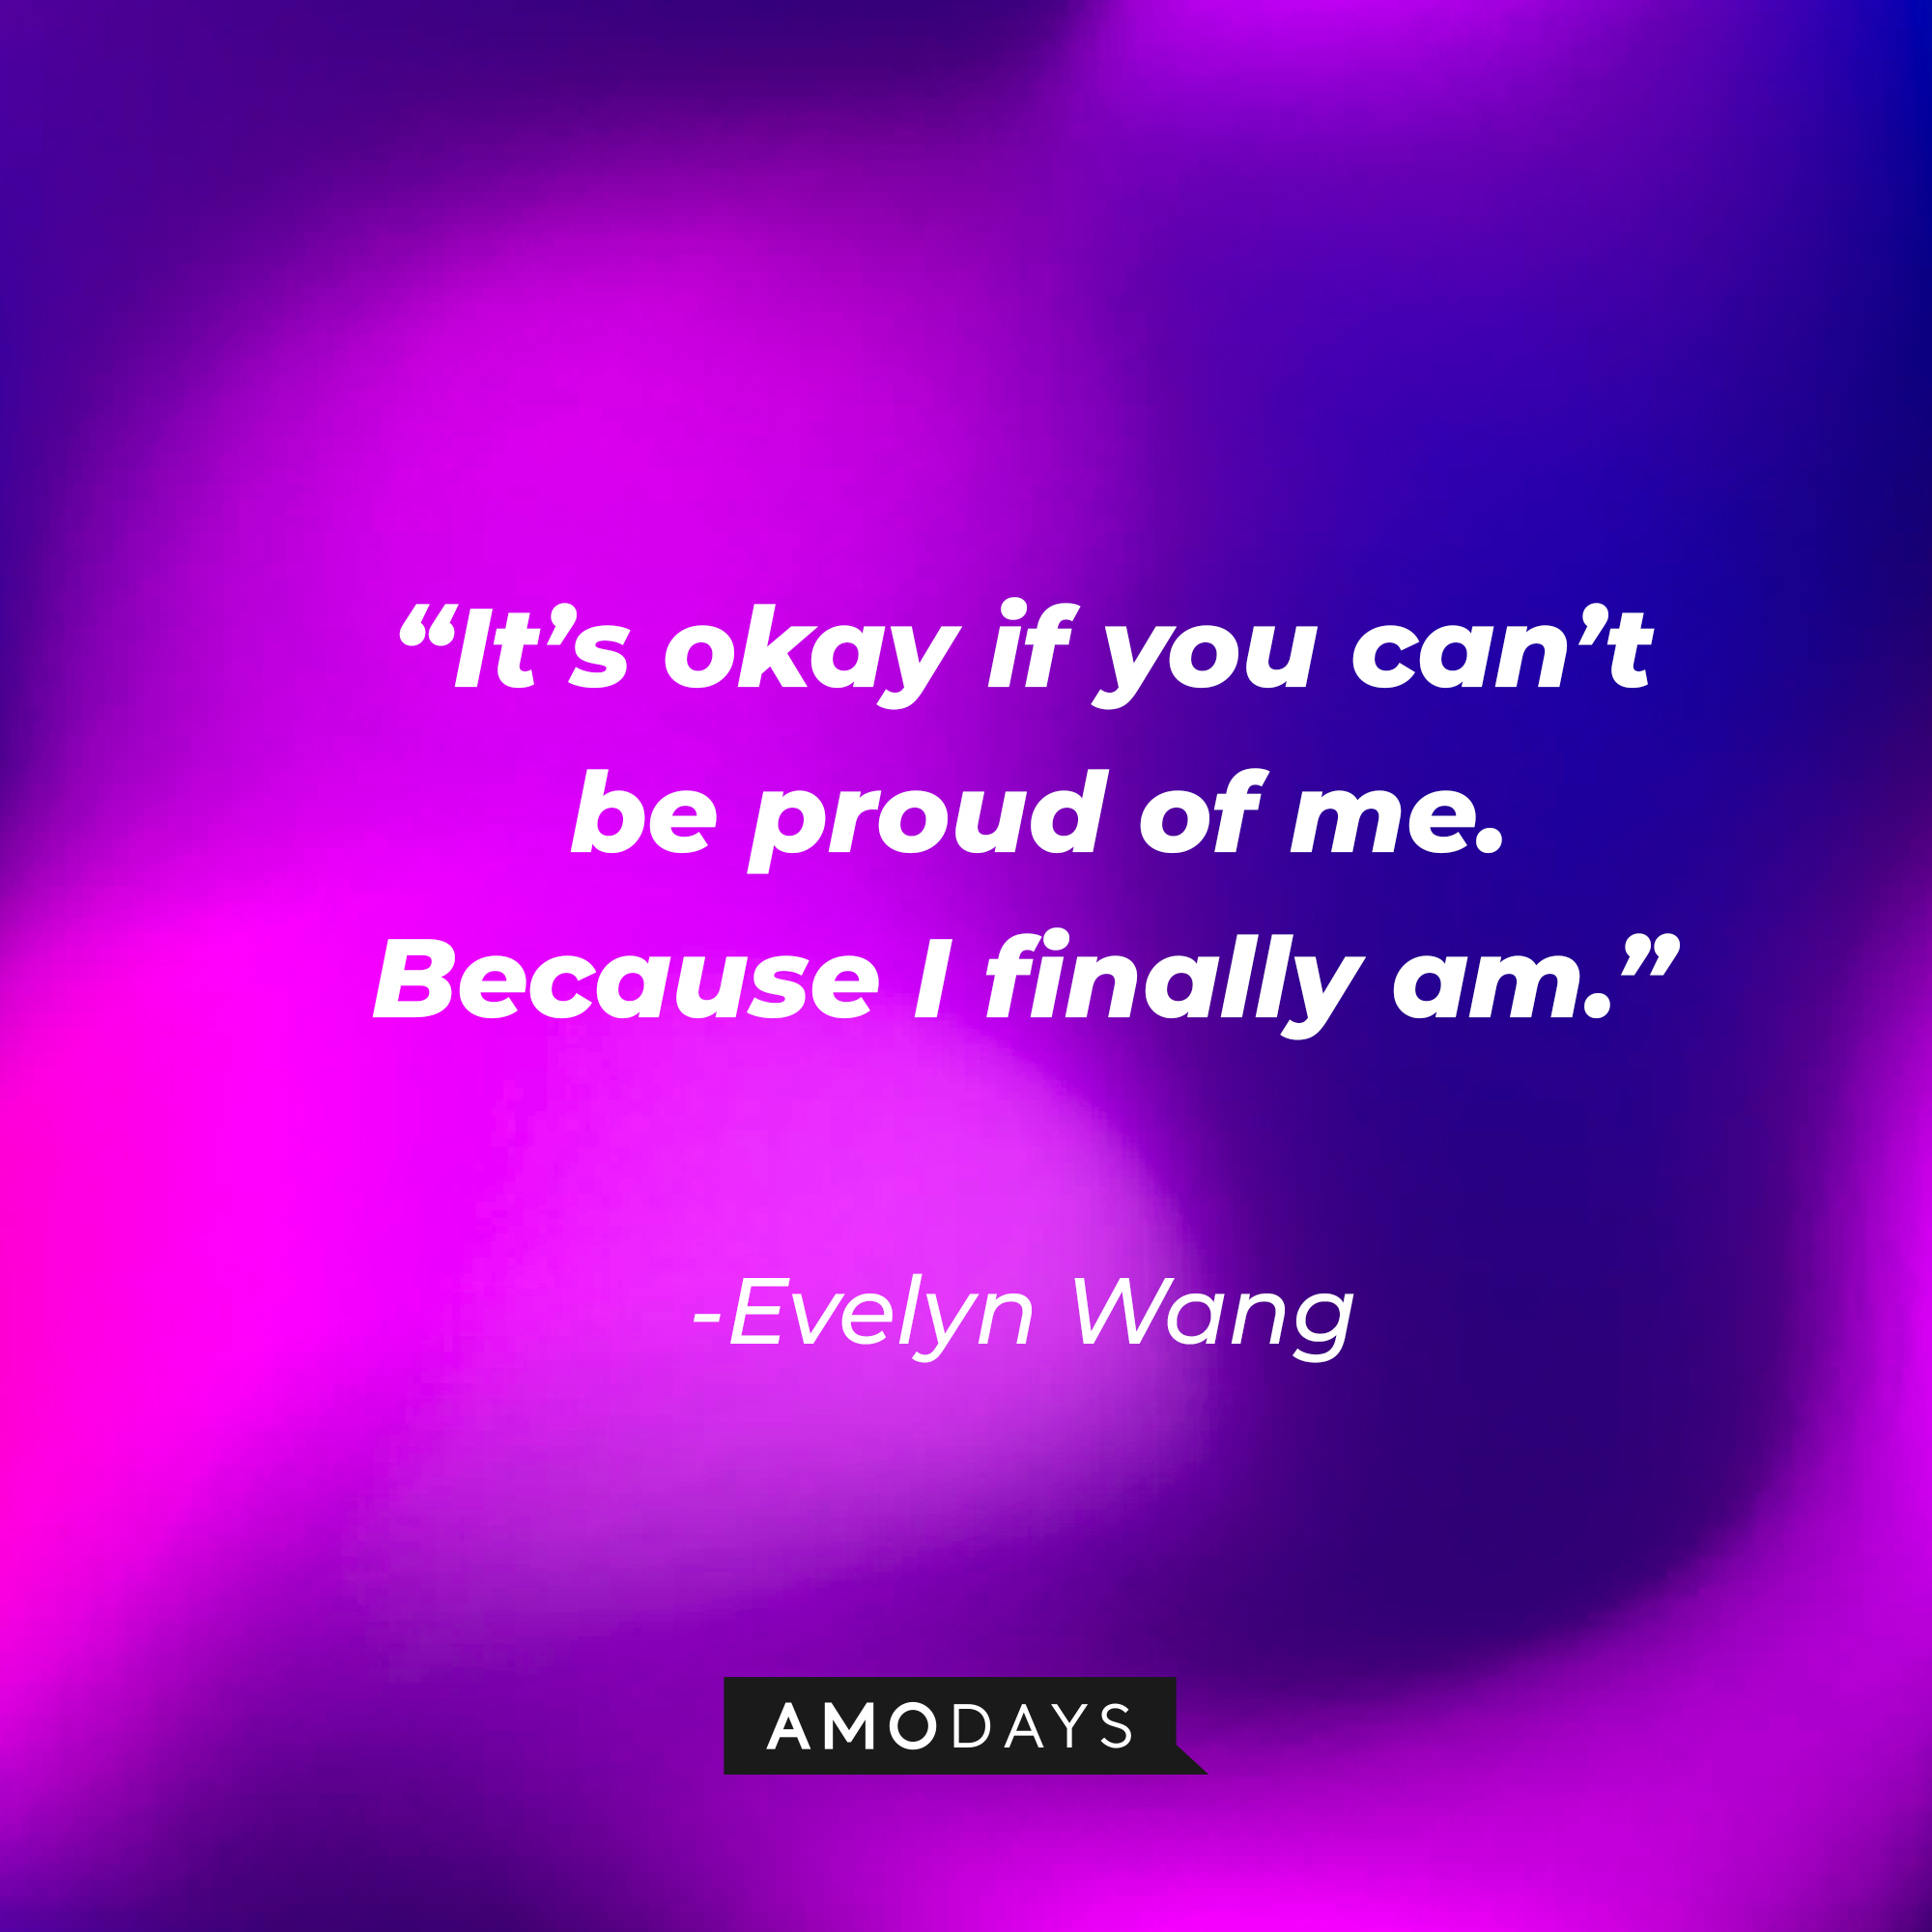 Evelyn Wang’s quote: “It’s okay if you can’t be proud of me. Because I finally am.”  | Source: AmoDays